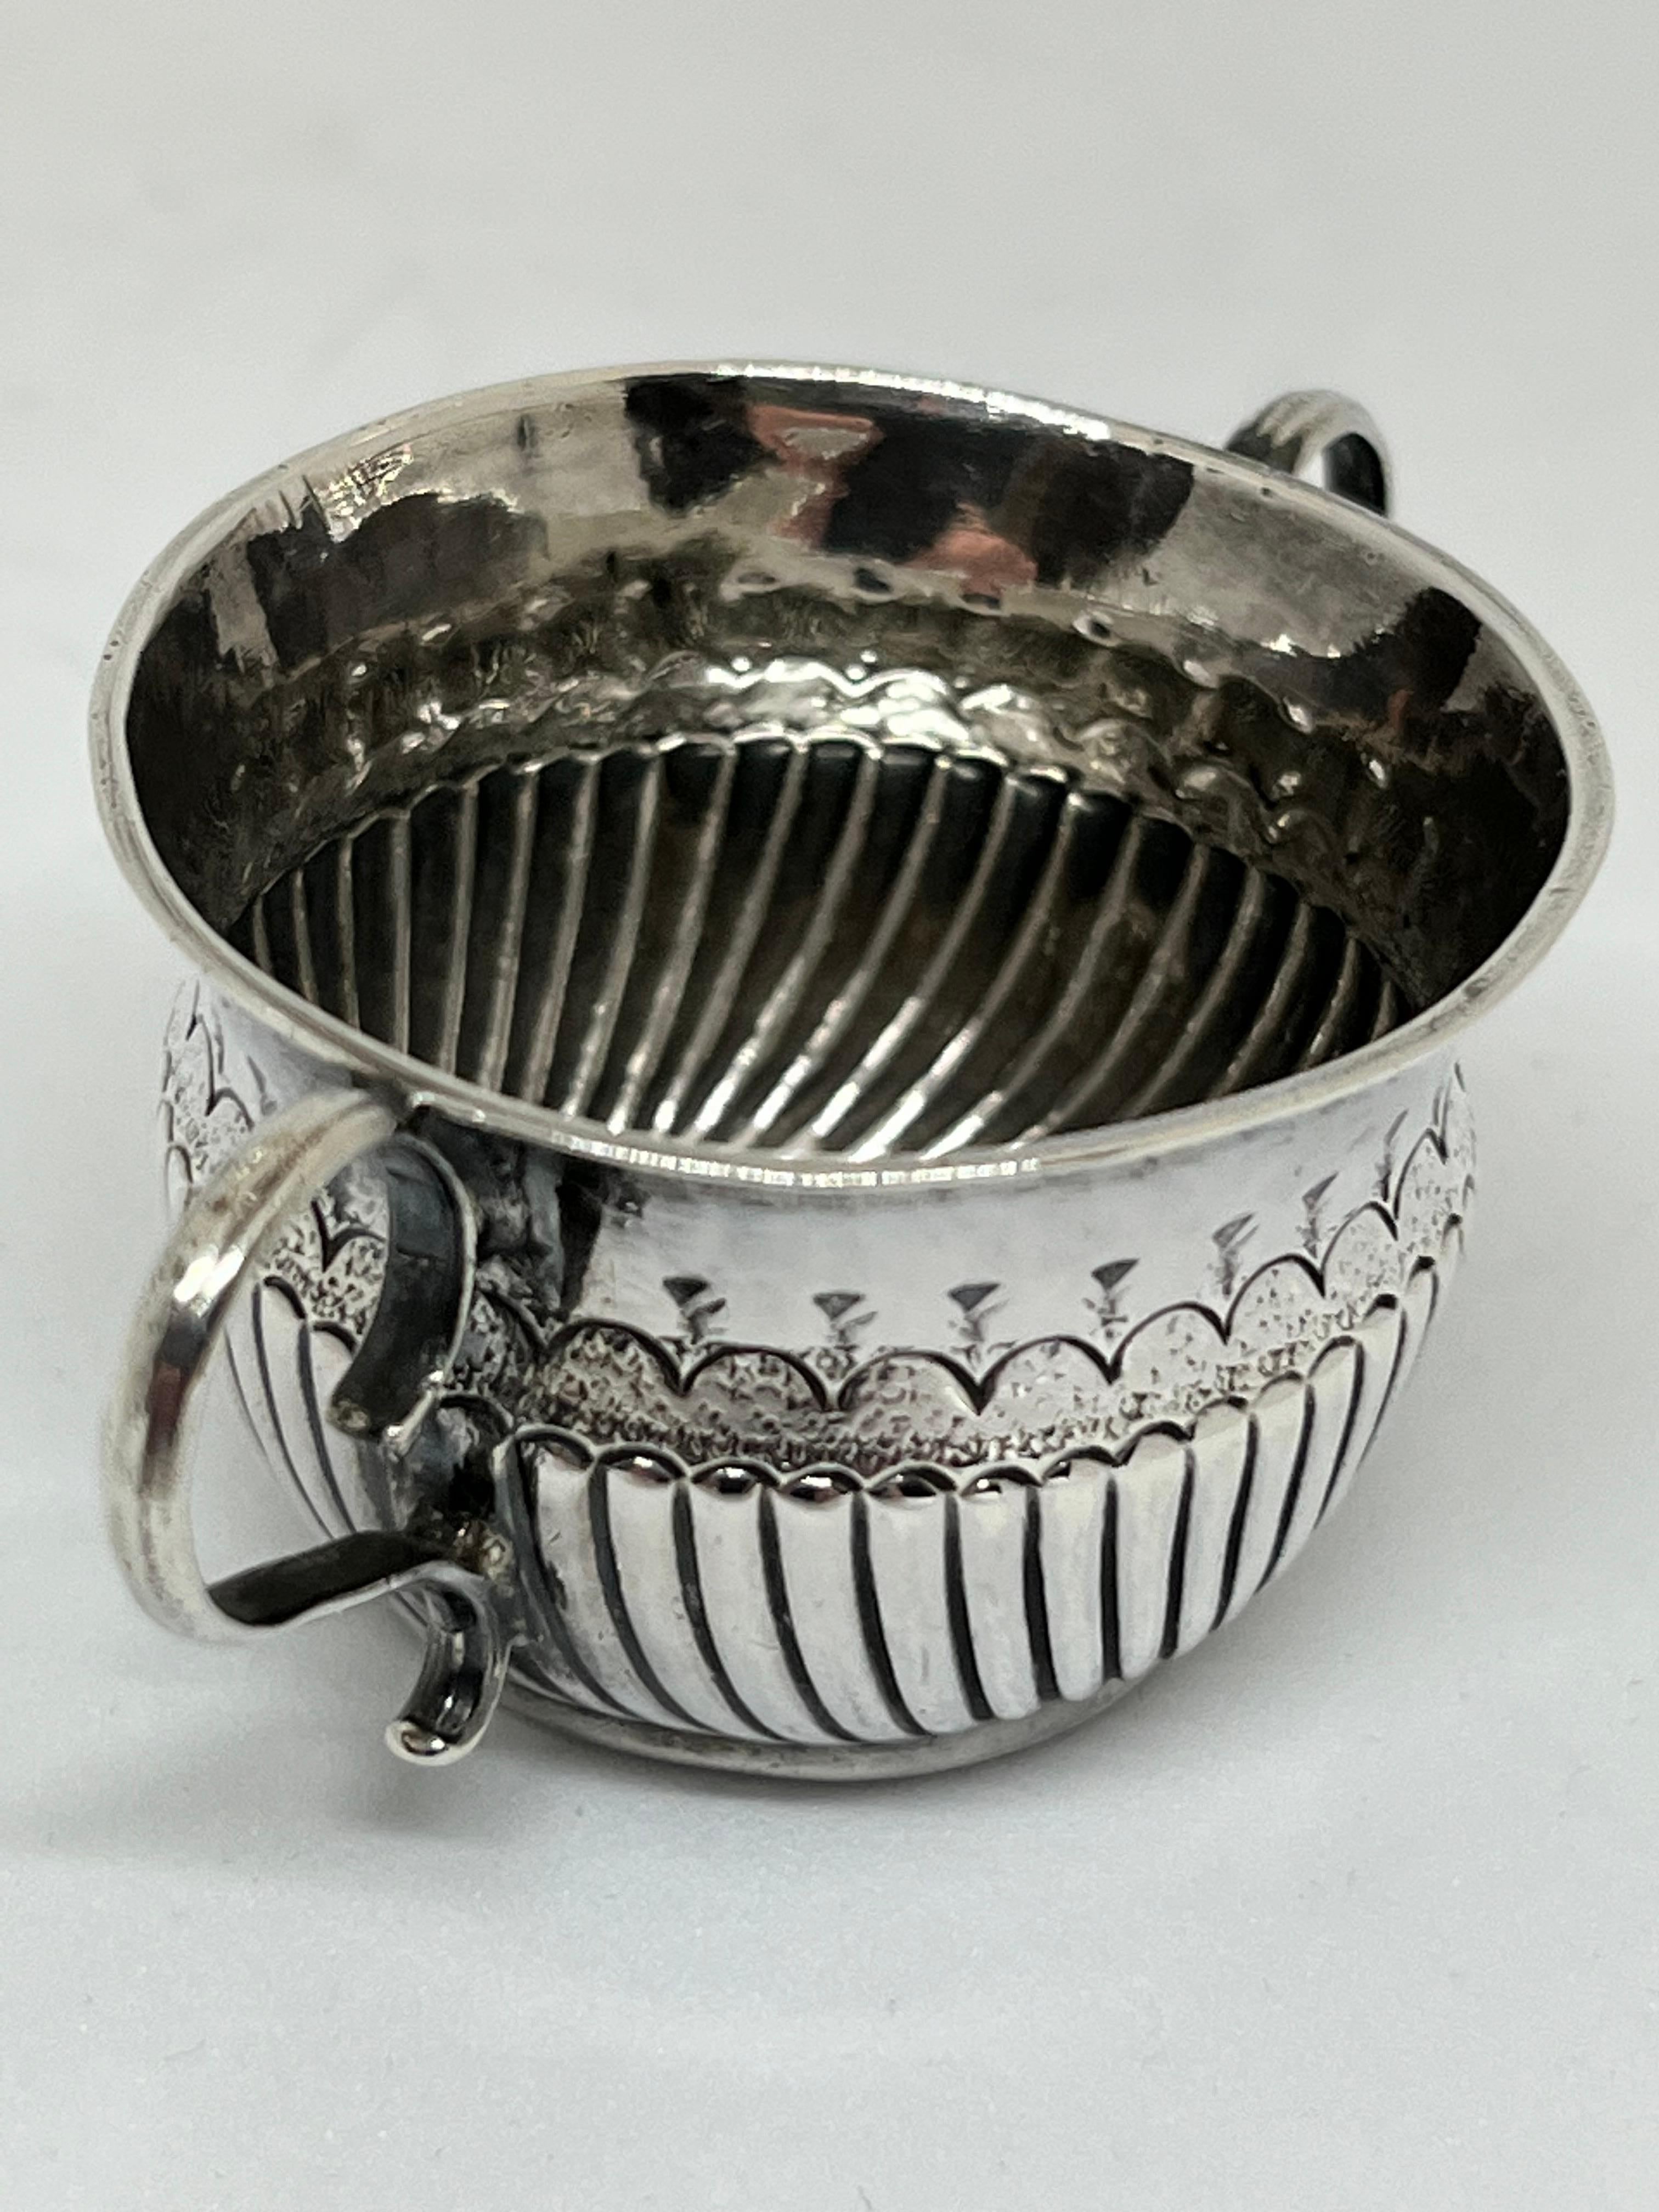 Queen Anne Silver Dram Cup. Maker: William Fleming. London, 1710.

A Queen Anne Britannia Standard (0.958%) silver dram cup, these are also often referred to as a miniature, or toy, two handled porringer, the body with fluting to the lower half,